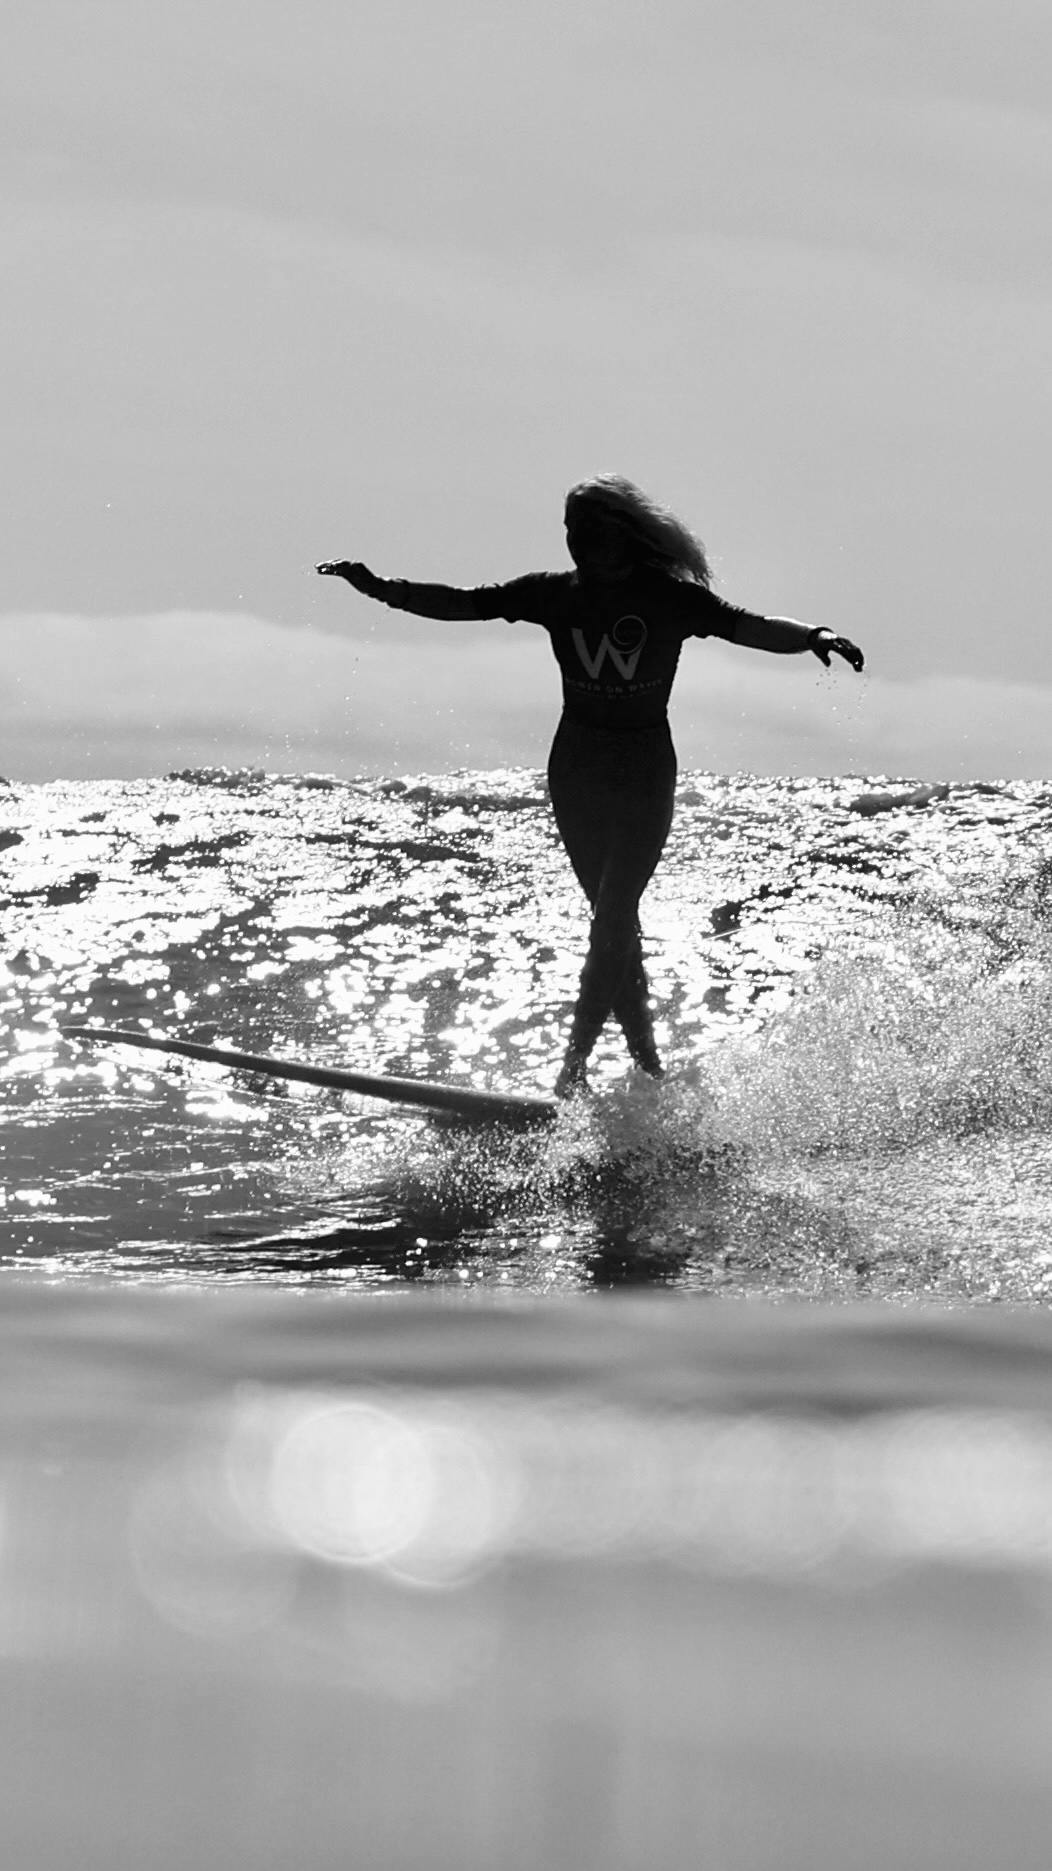 A female surfer rides a wave with both arms stretched outward